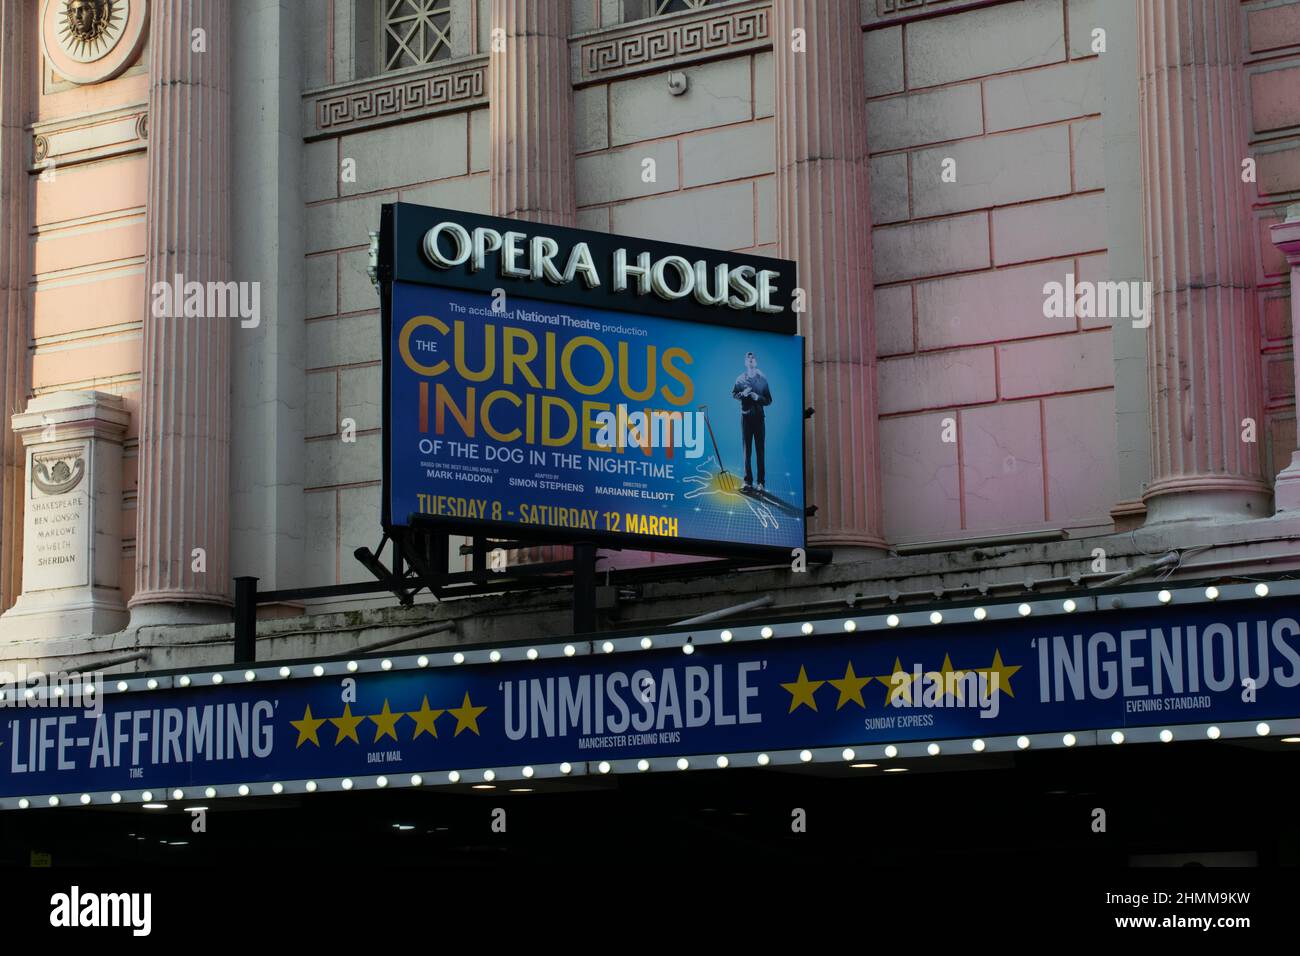 Opera House Manchester theatre front with sign for The Curious Incident of the Dog in the Night Time Stock Photo